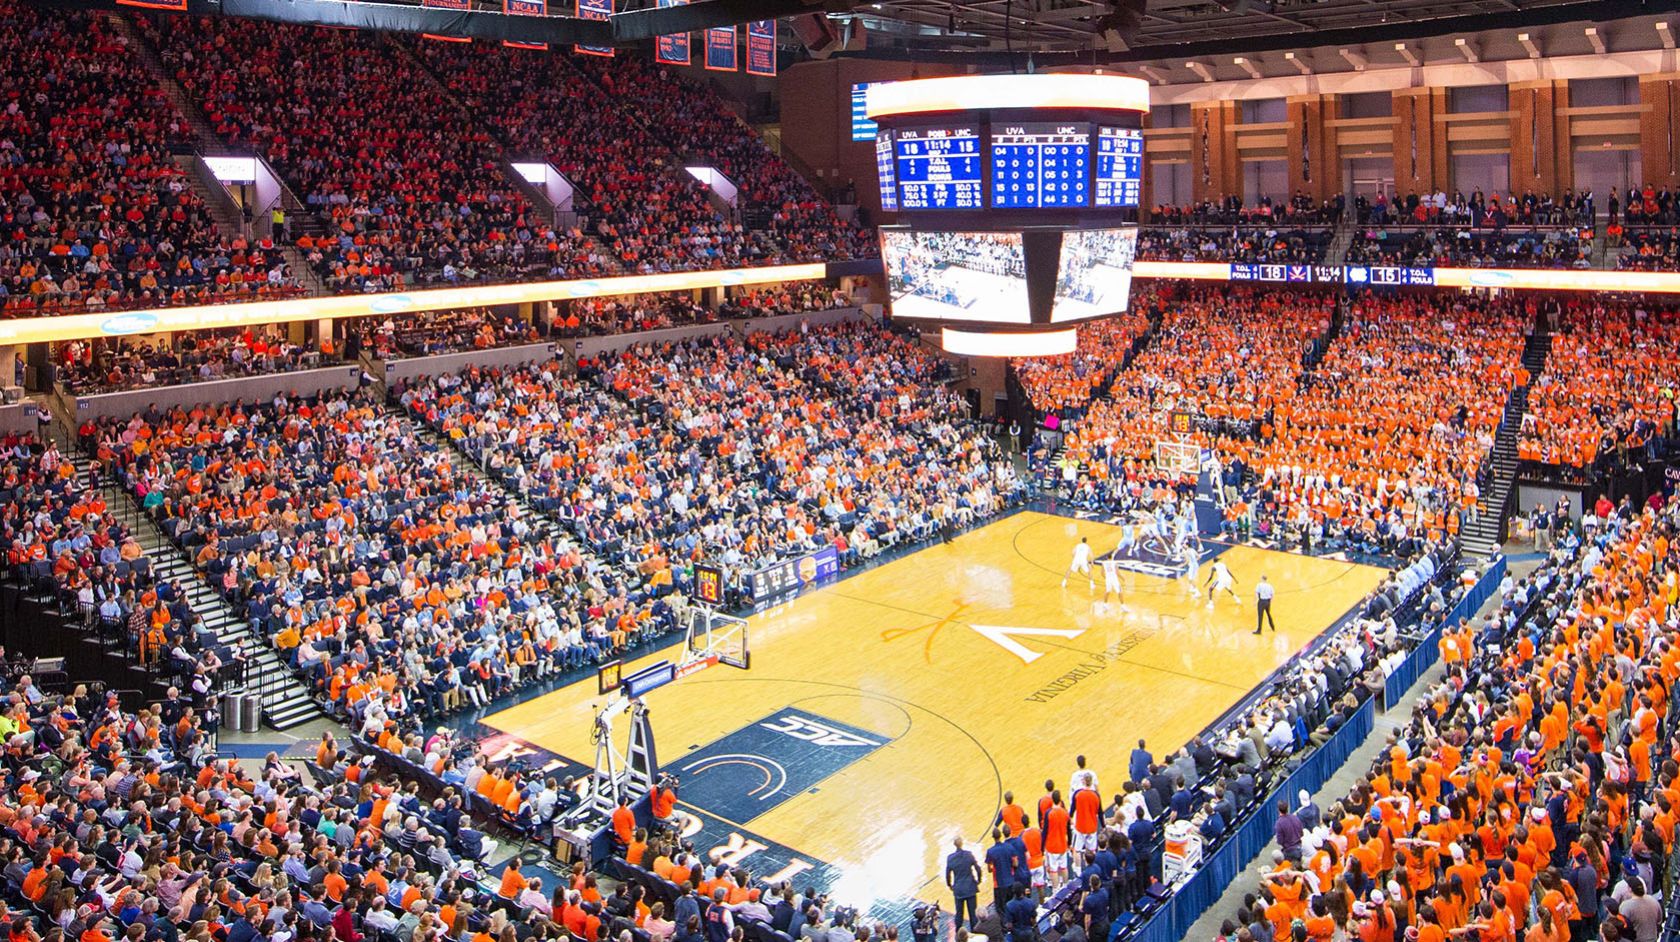 Inside JPJ for a game